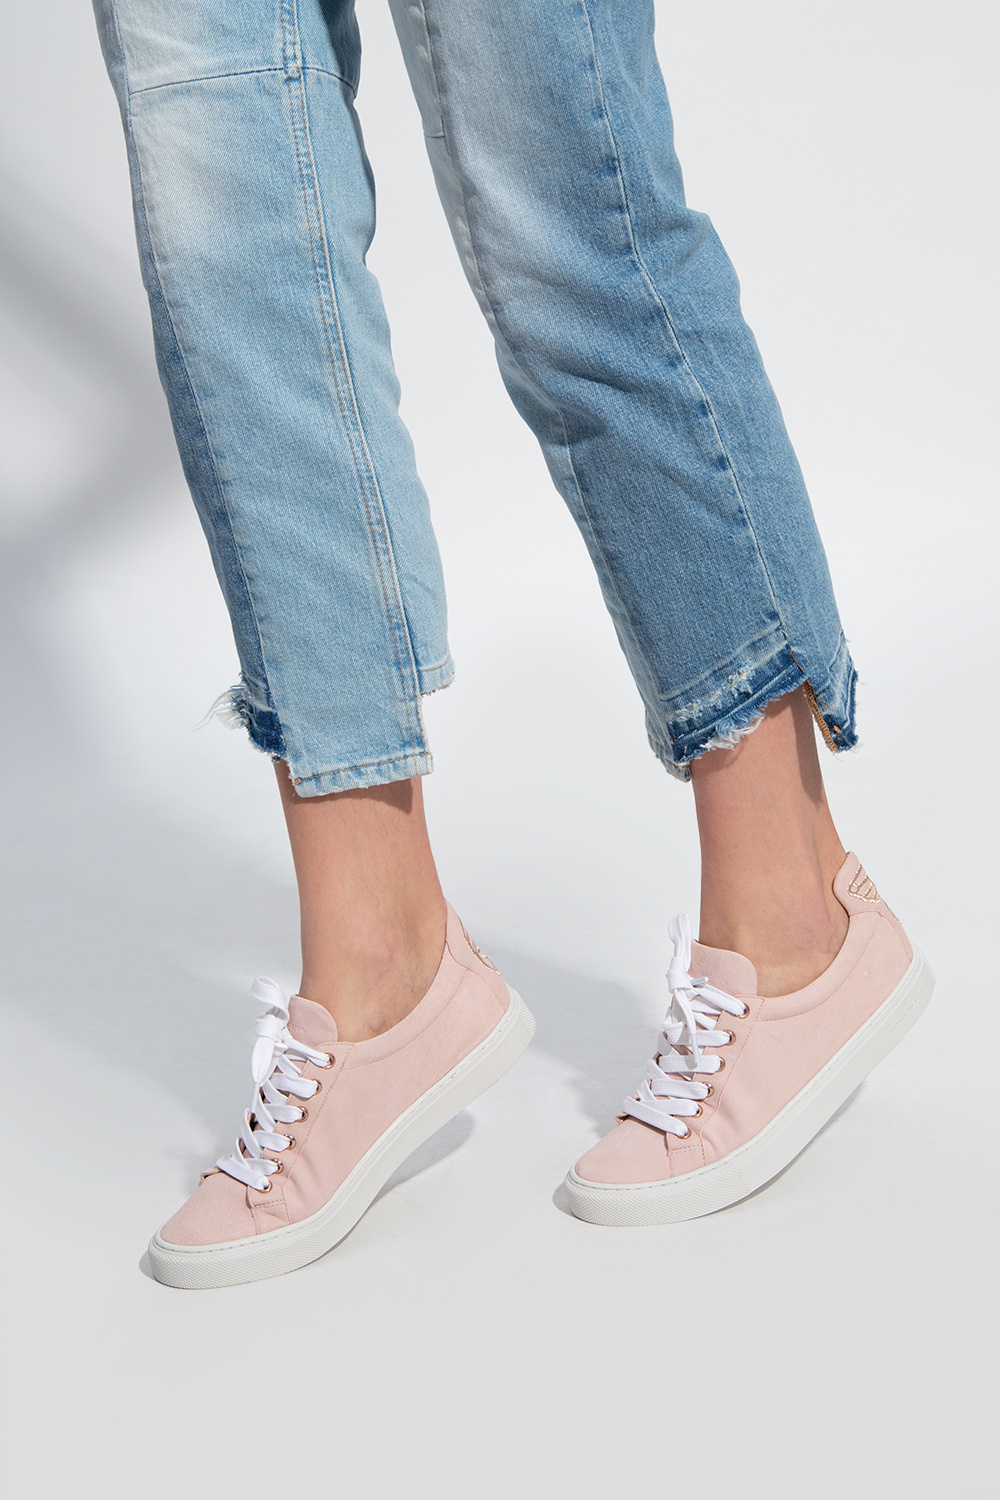 Sophia Webster ‘Butterfly’ lace-up shoes